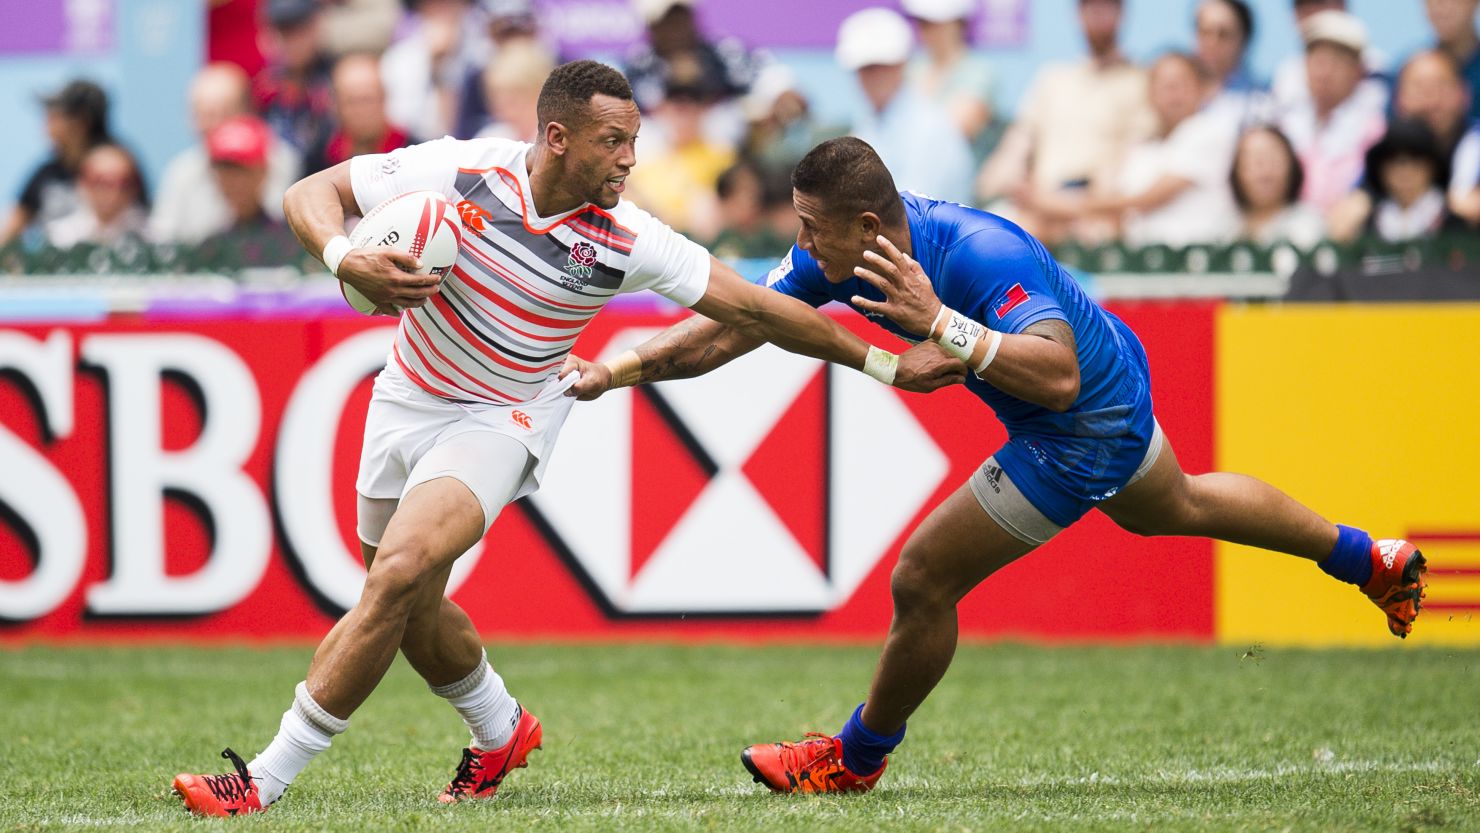 Winger Dan Norton now has a record 246 tries in rugby sevens